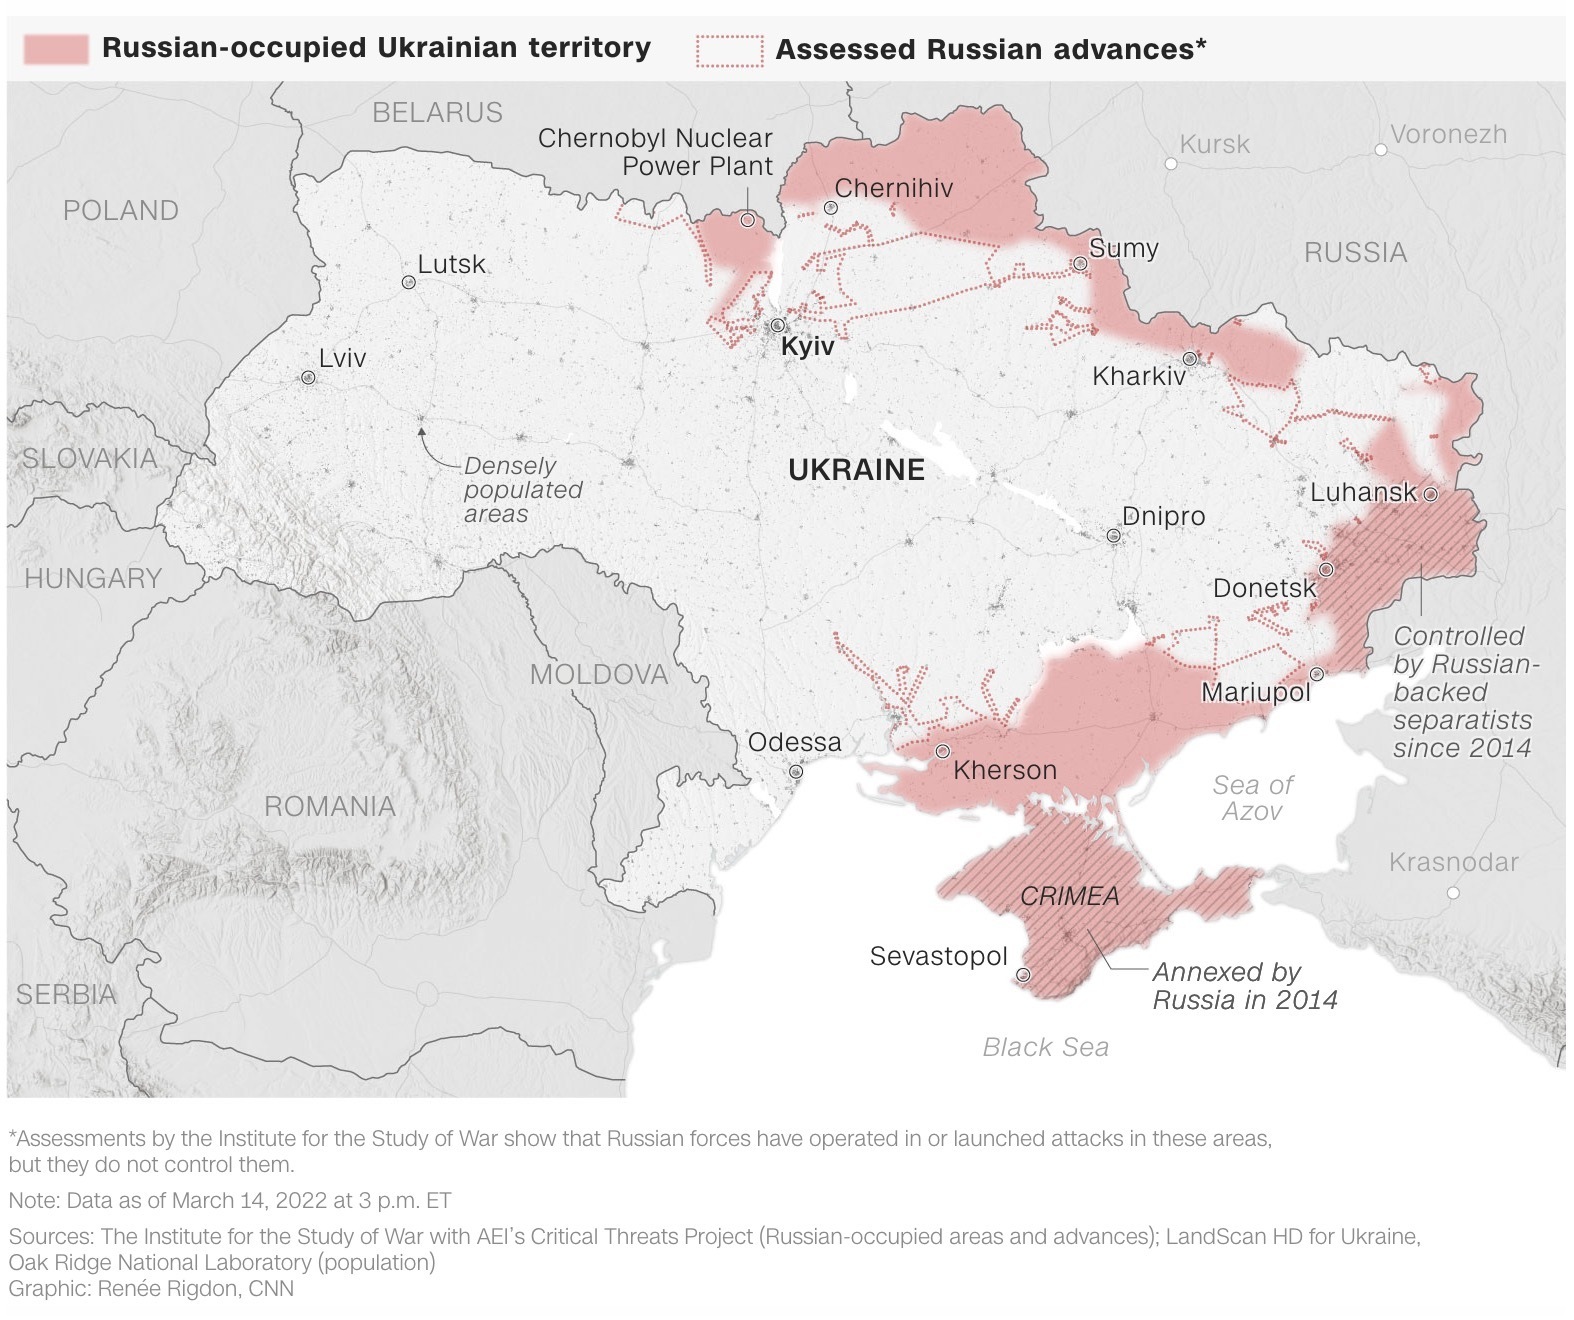 Here's the latest map of Russianoccupied territory in Ukraine